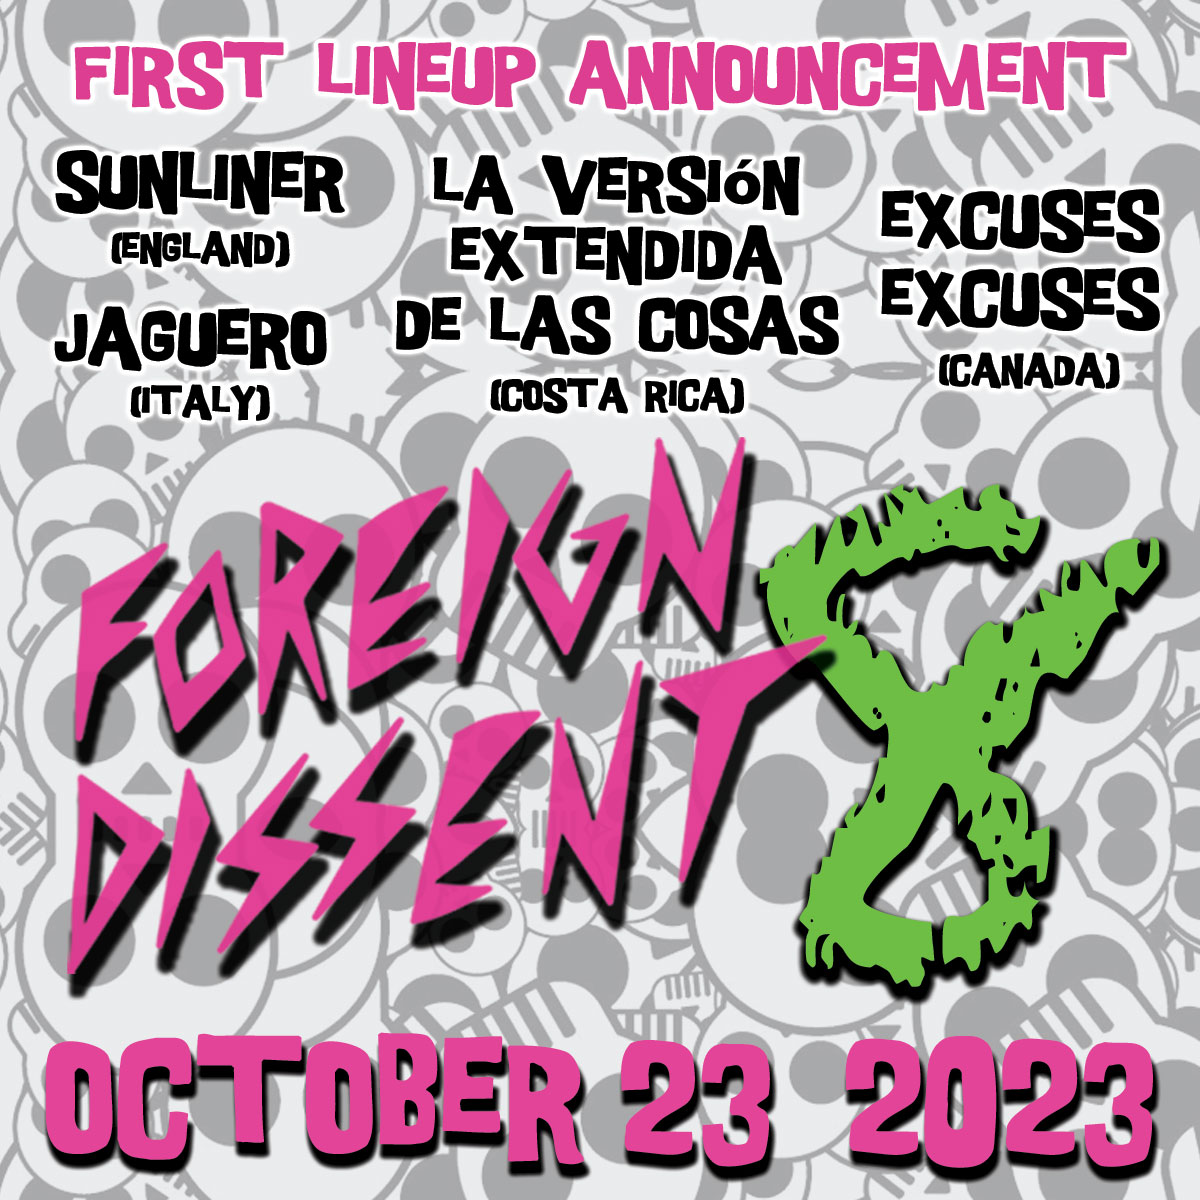 First Lineup Announcement for Foreign Dissent on October 23, 2023 featuring Sunliner from England, Jaguero from Italy, La Versión Extendida de las Cosas from Costa Rica, and Excuses Excuses from Canada.